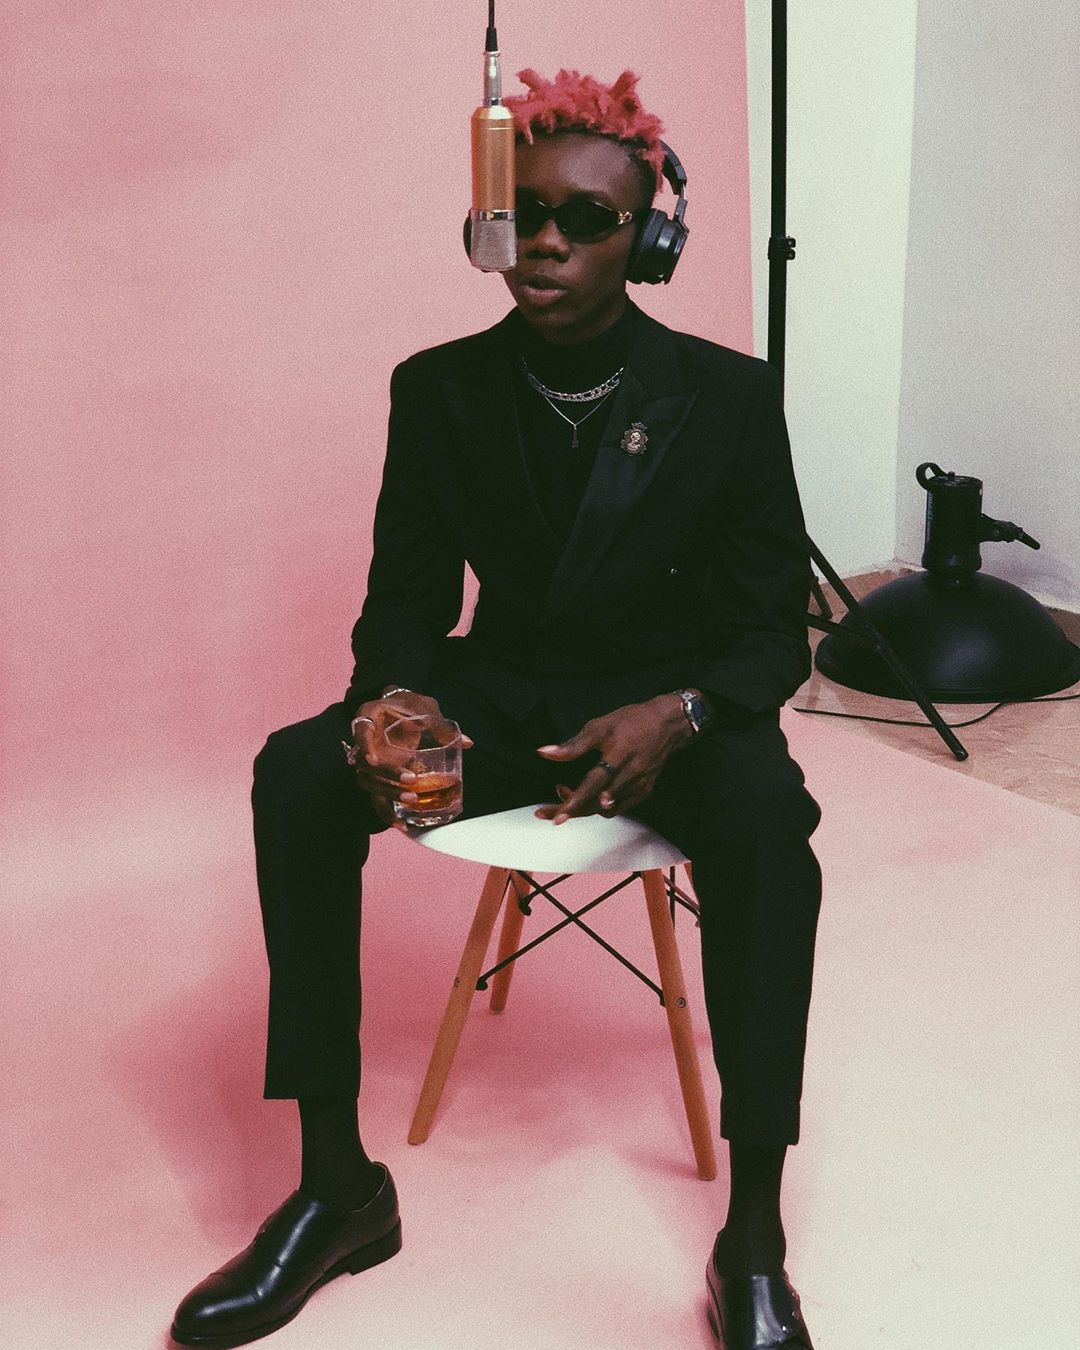 Why Blaqbonez Is Dethroning All Your Favourite Rappers In Nigeria